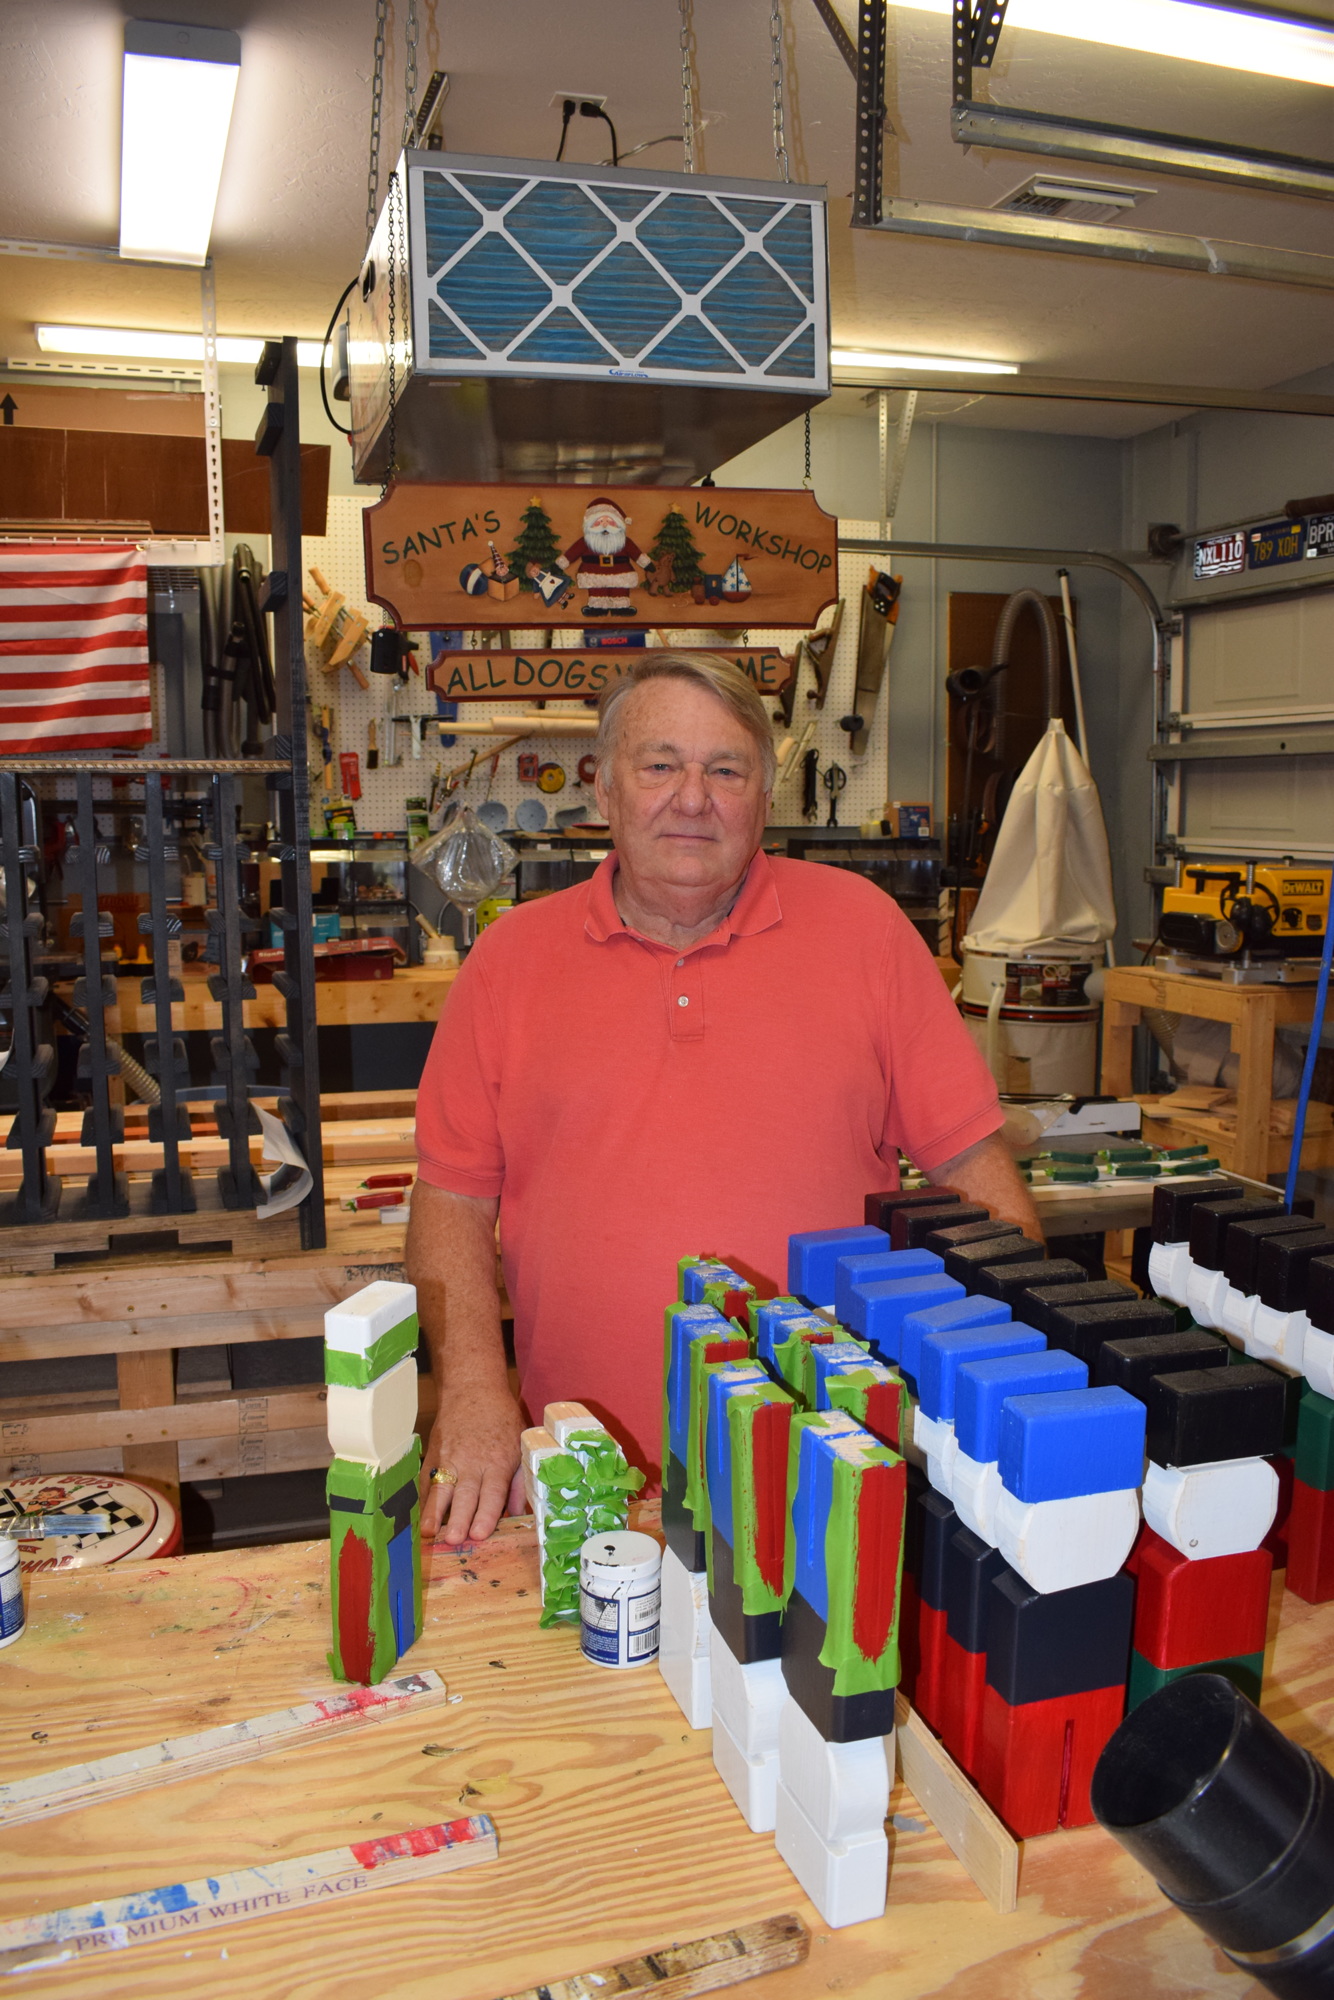 Panther Ridge's Rick Schuknecht is a woodworker who would like to start a new arts association.